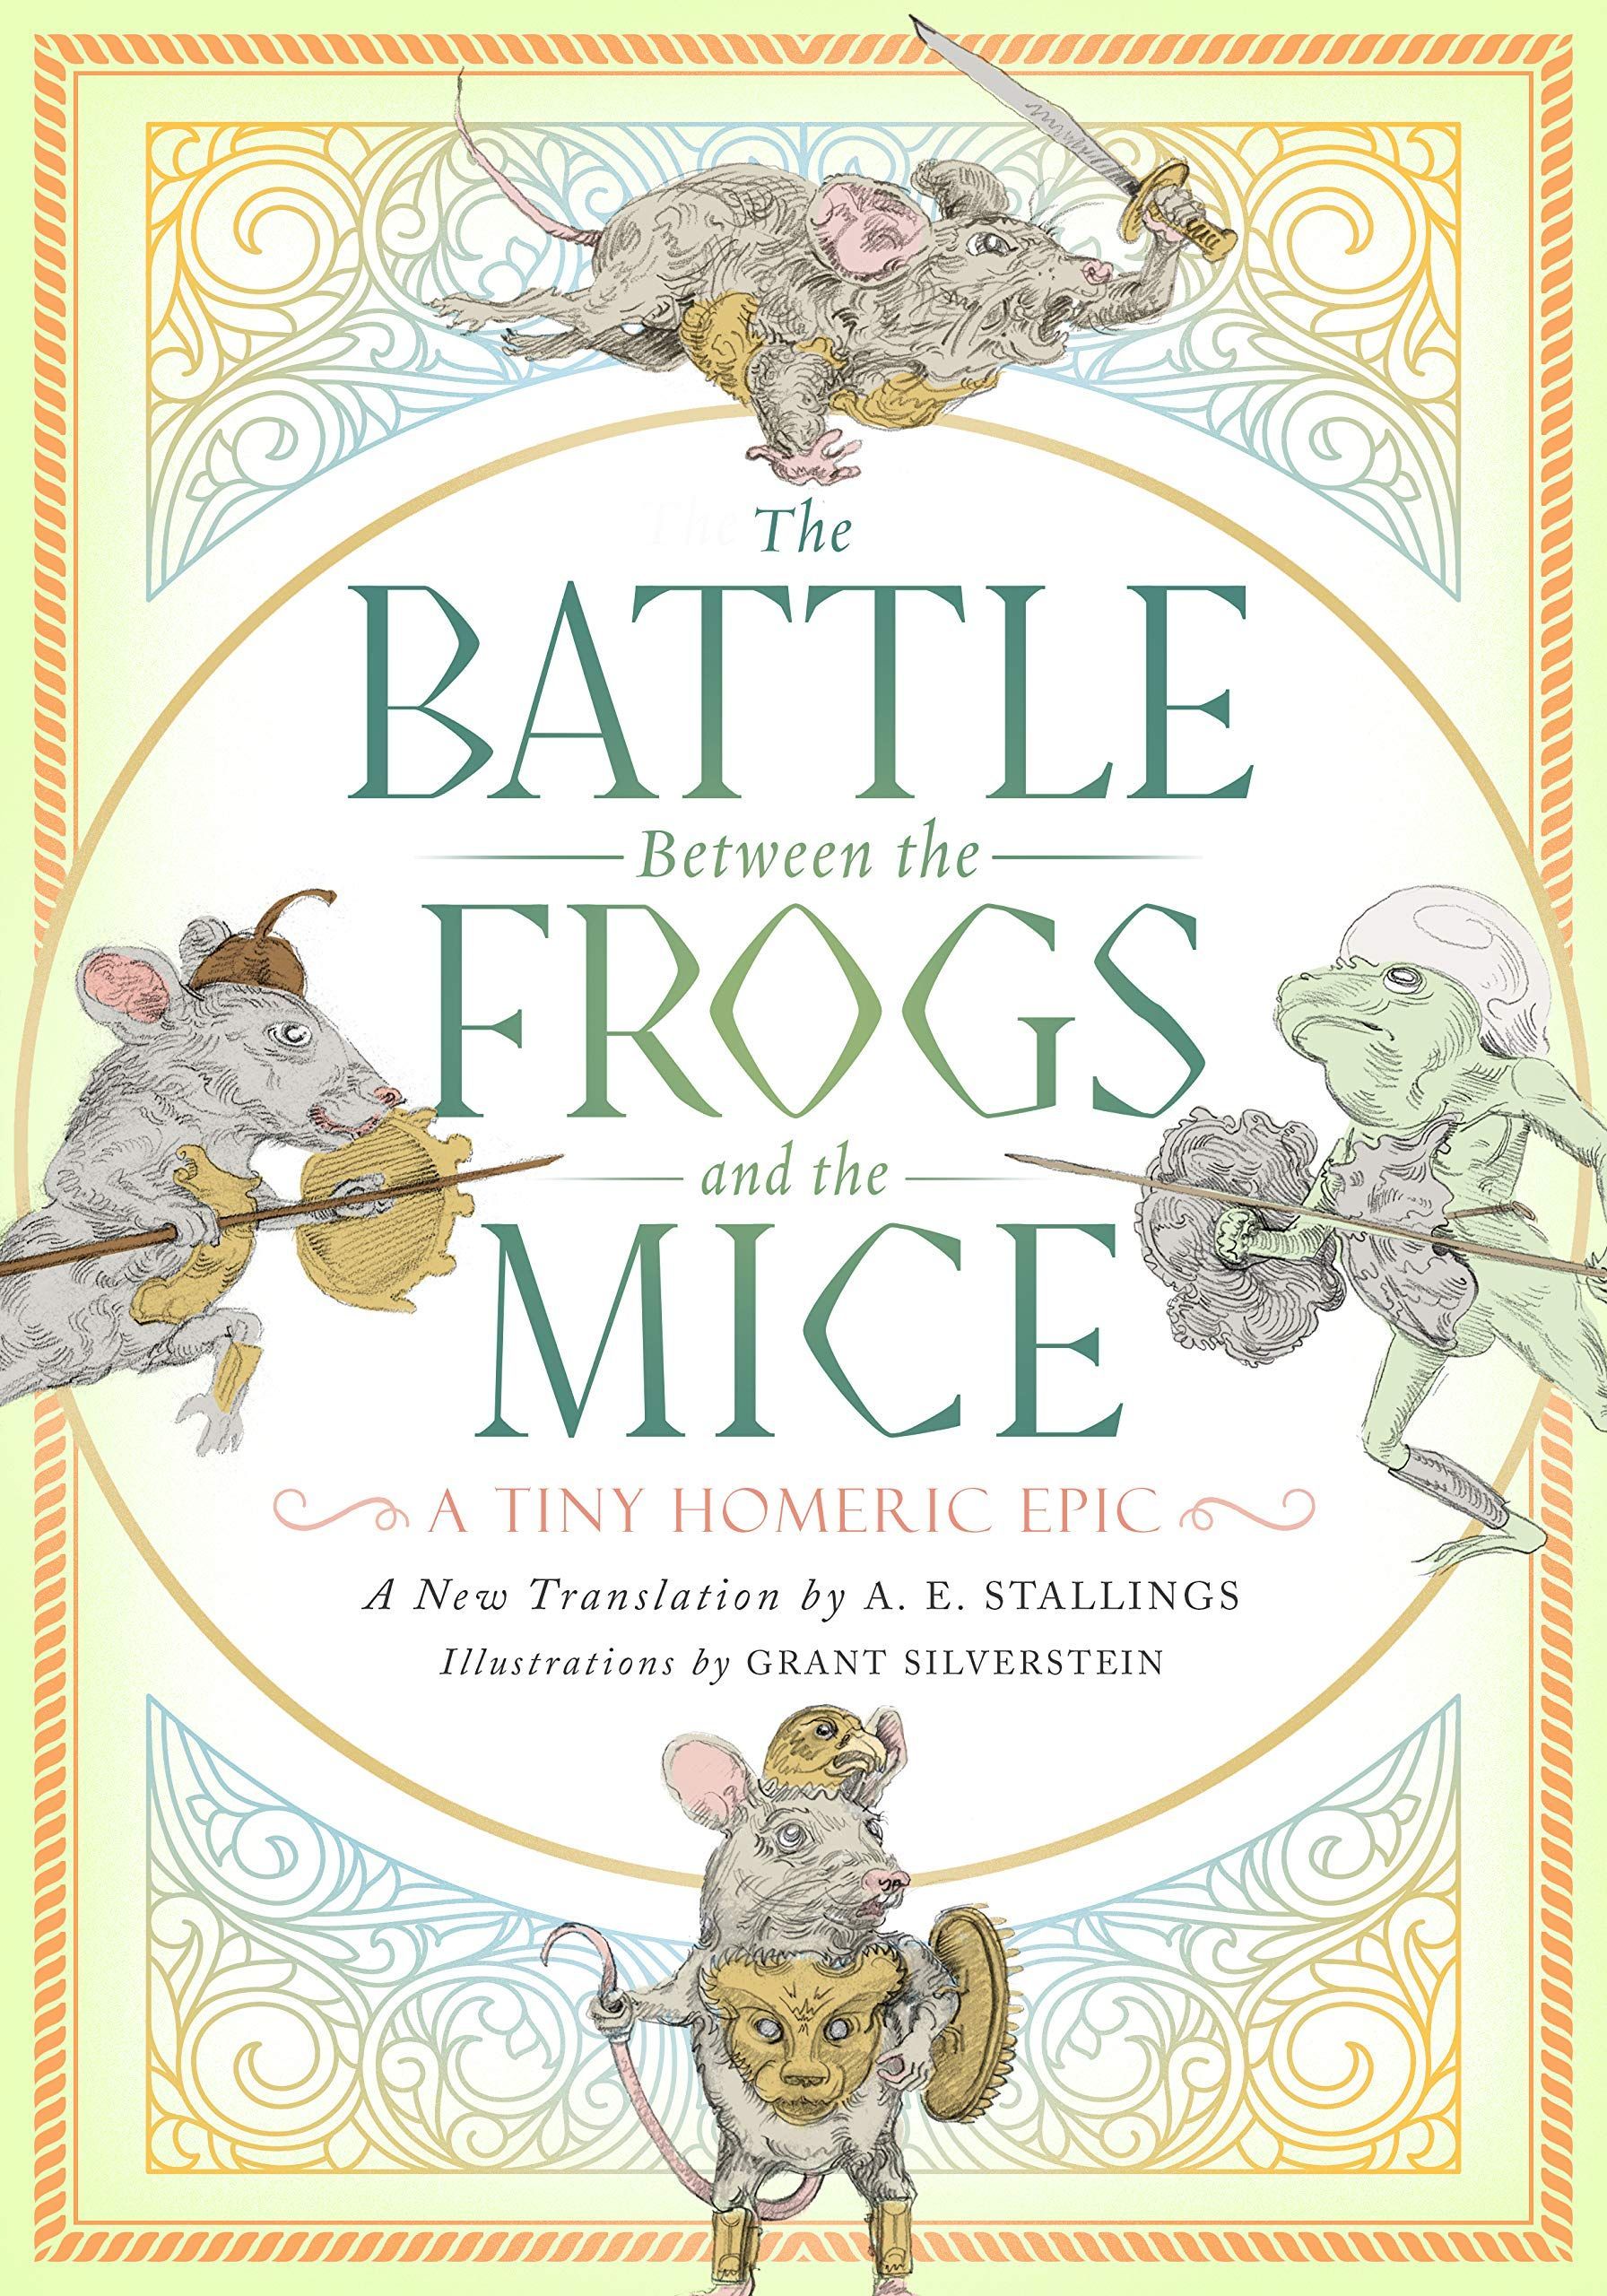 The Enduring Grace of the Trivial: On “The Battle Between the Frogs and the Mice”